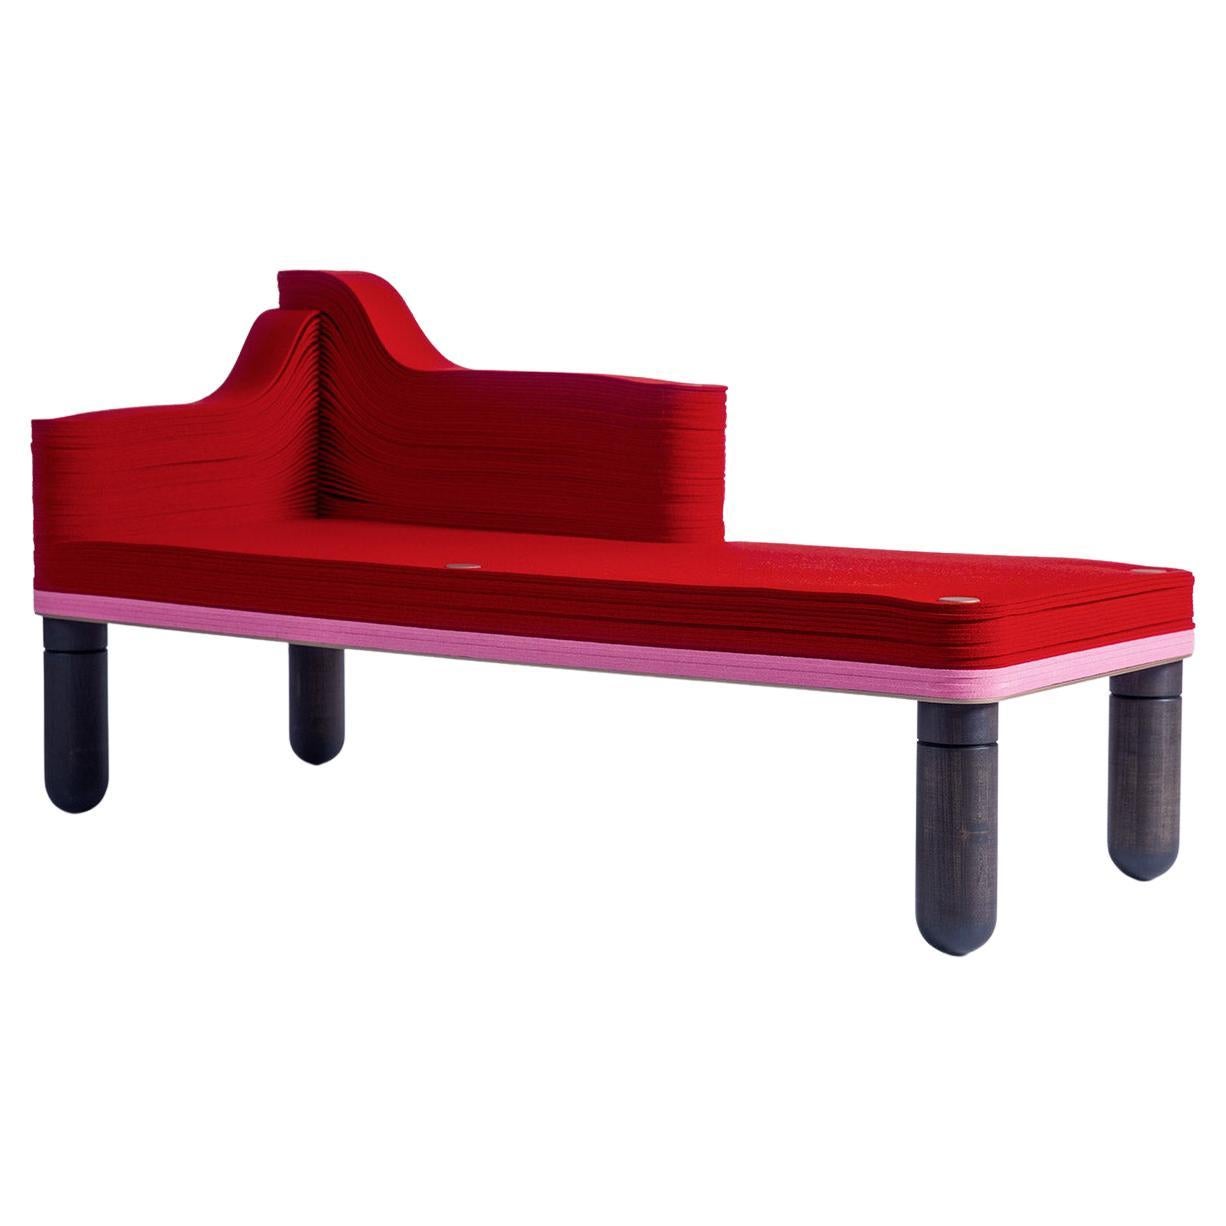 Madame D, Felt and Wood Chaise Lounge, Drake / Anderson in Stackabl For Sale